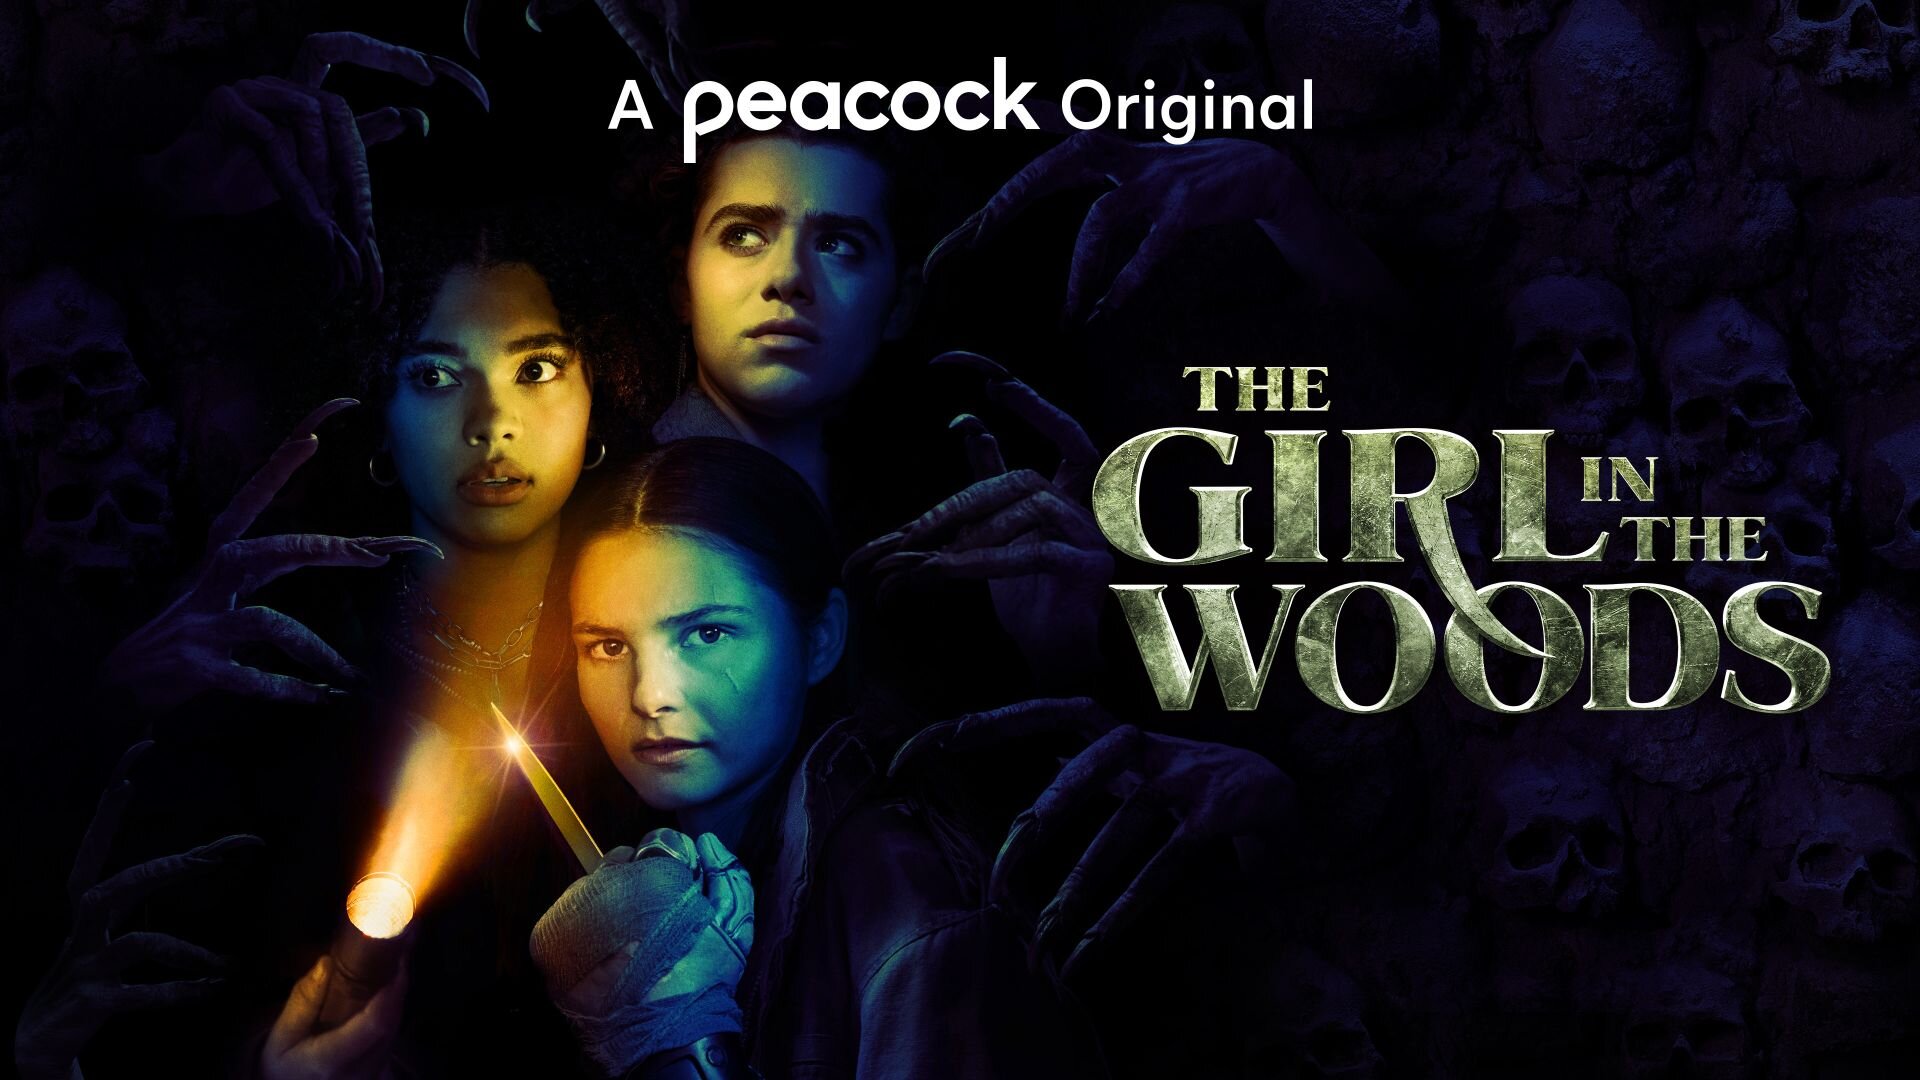 First Trailer for “The Girl In The Woods”, DREAMLAND Release Cast Recording, and more!